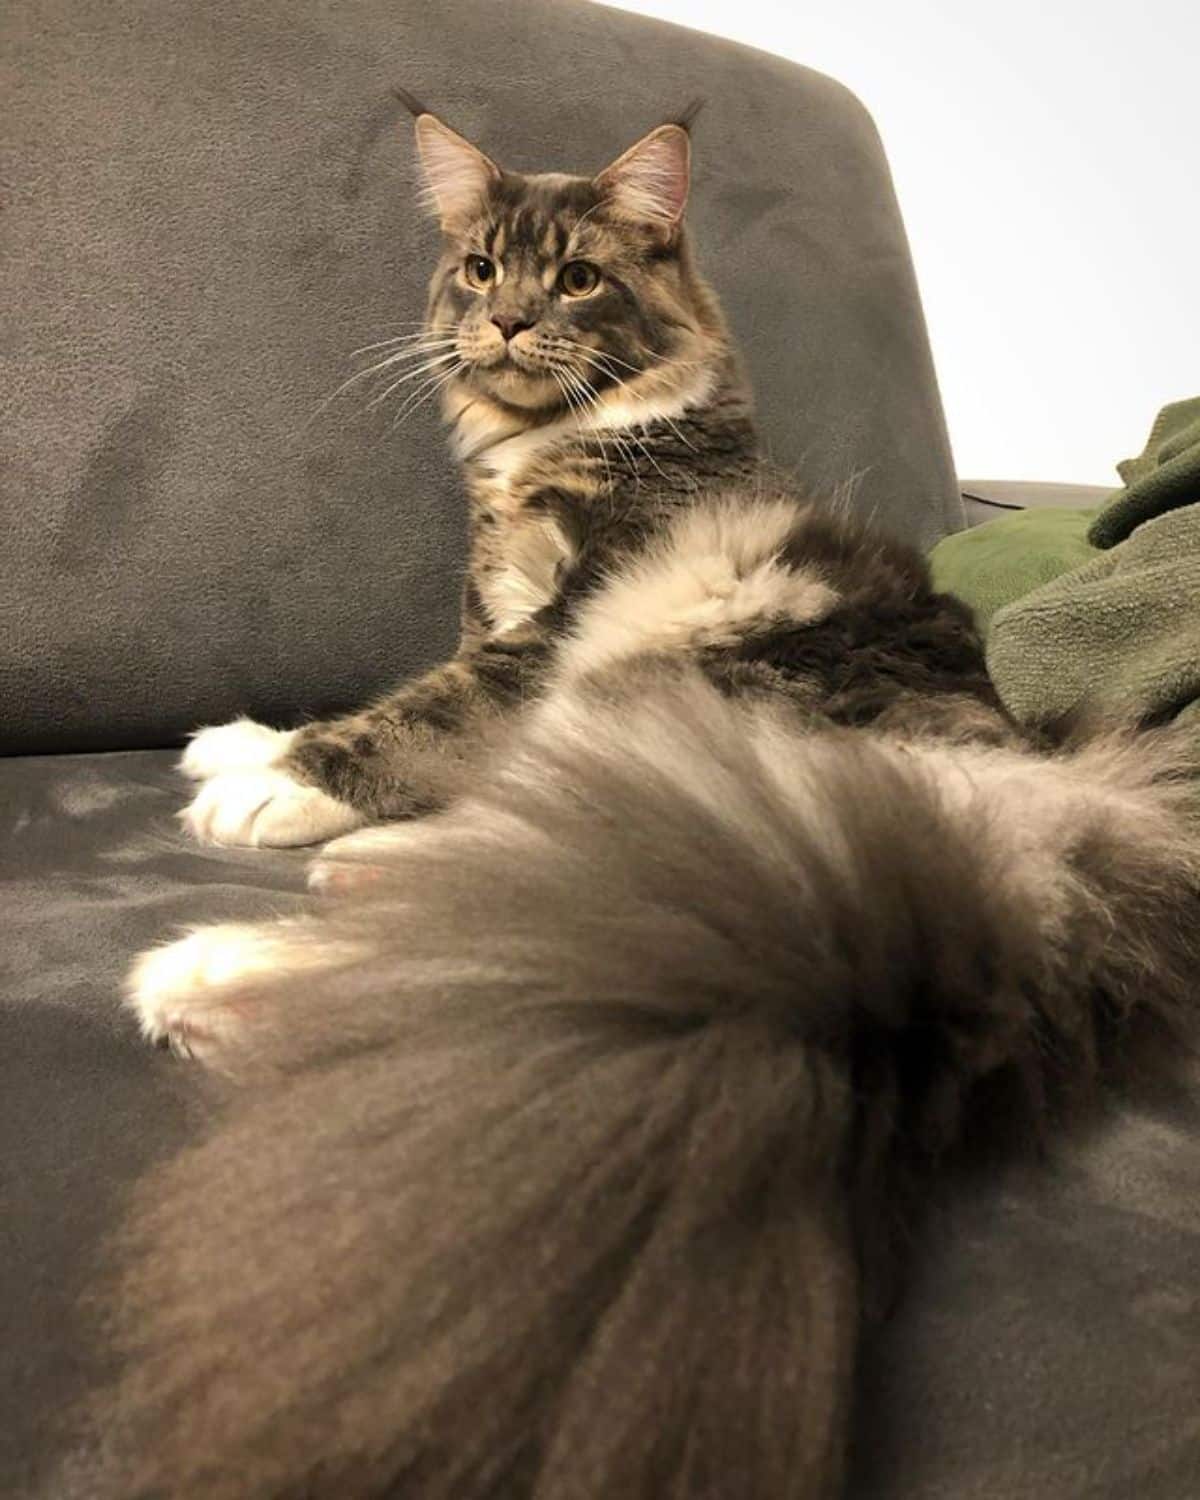 A fluffy tabby maine coon lying on a couch.